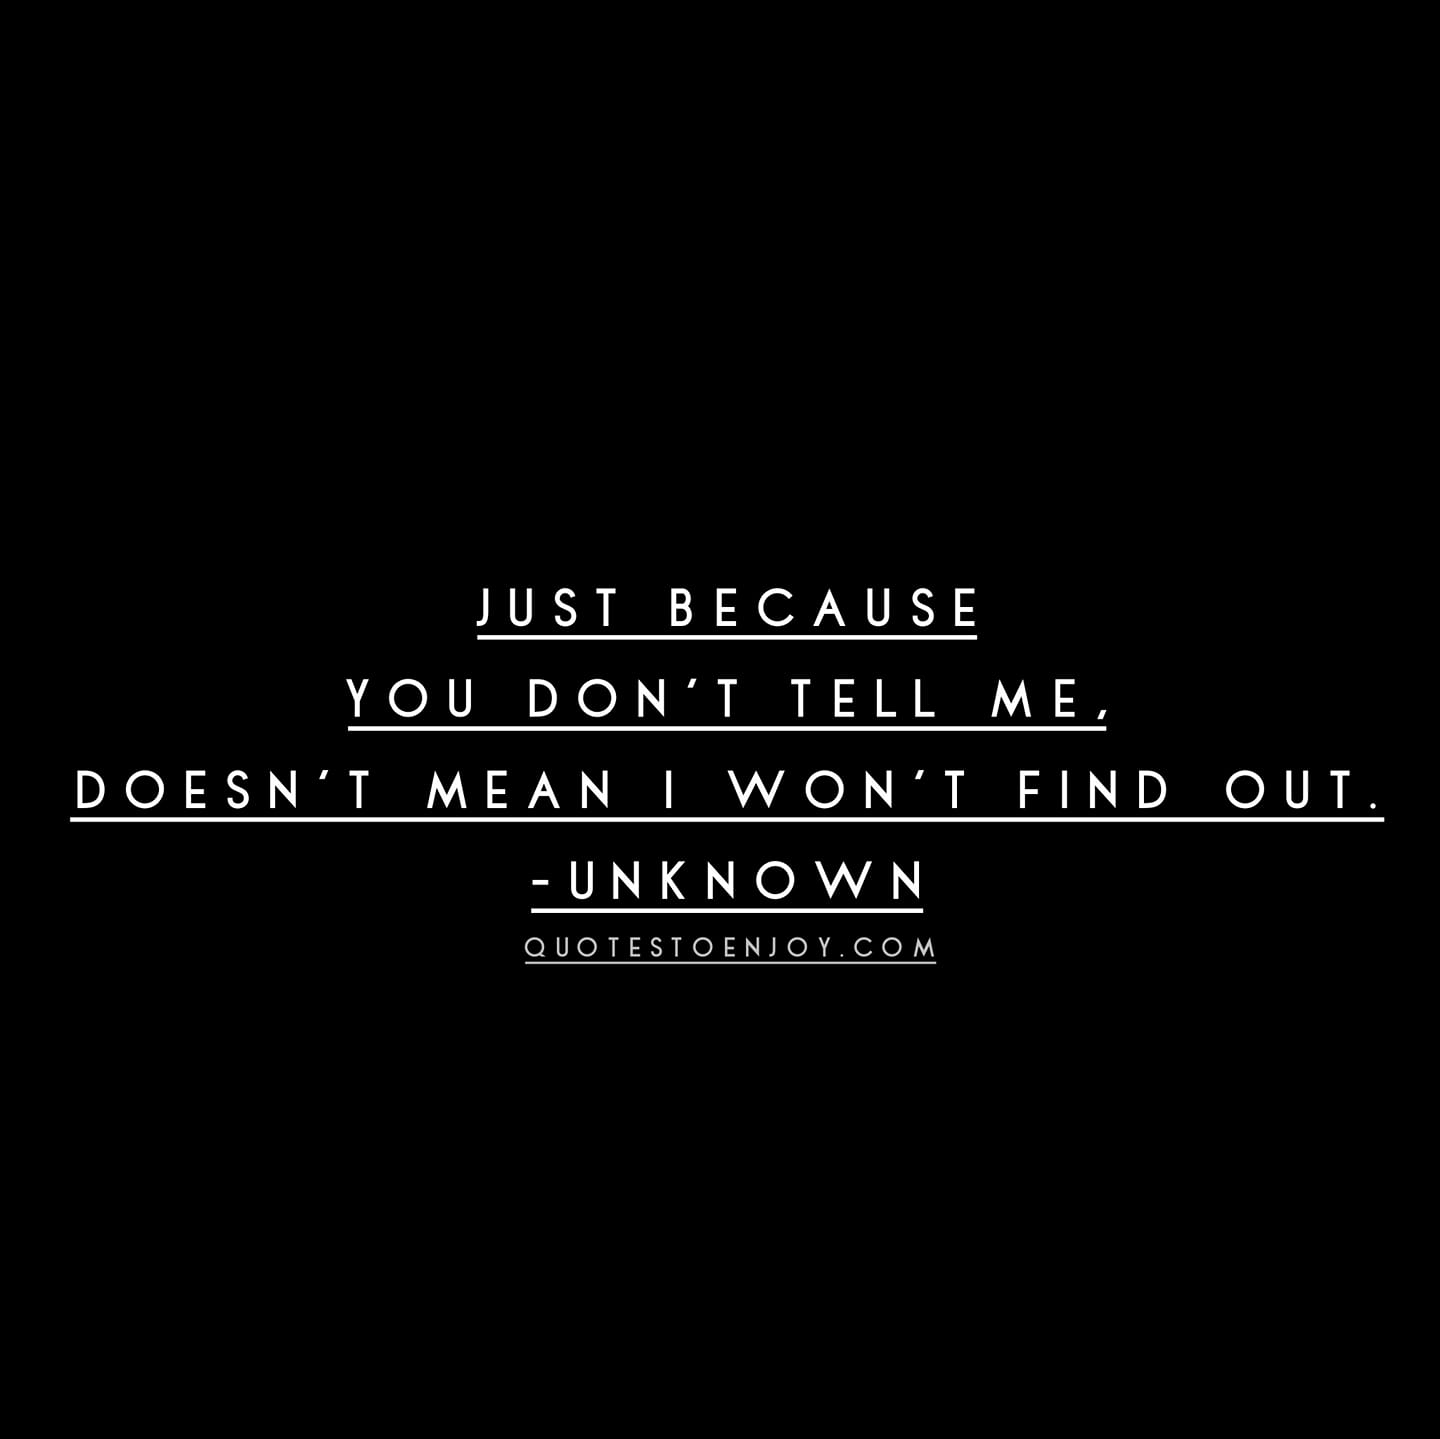 Just because you don't tell me, doesn't mean... - Author Unknown